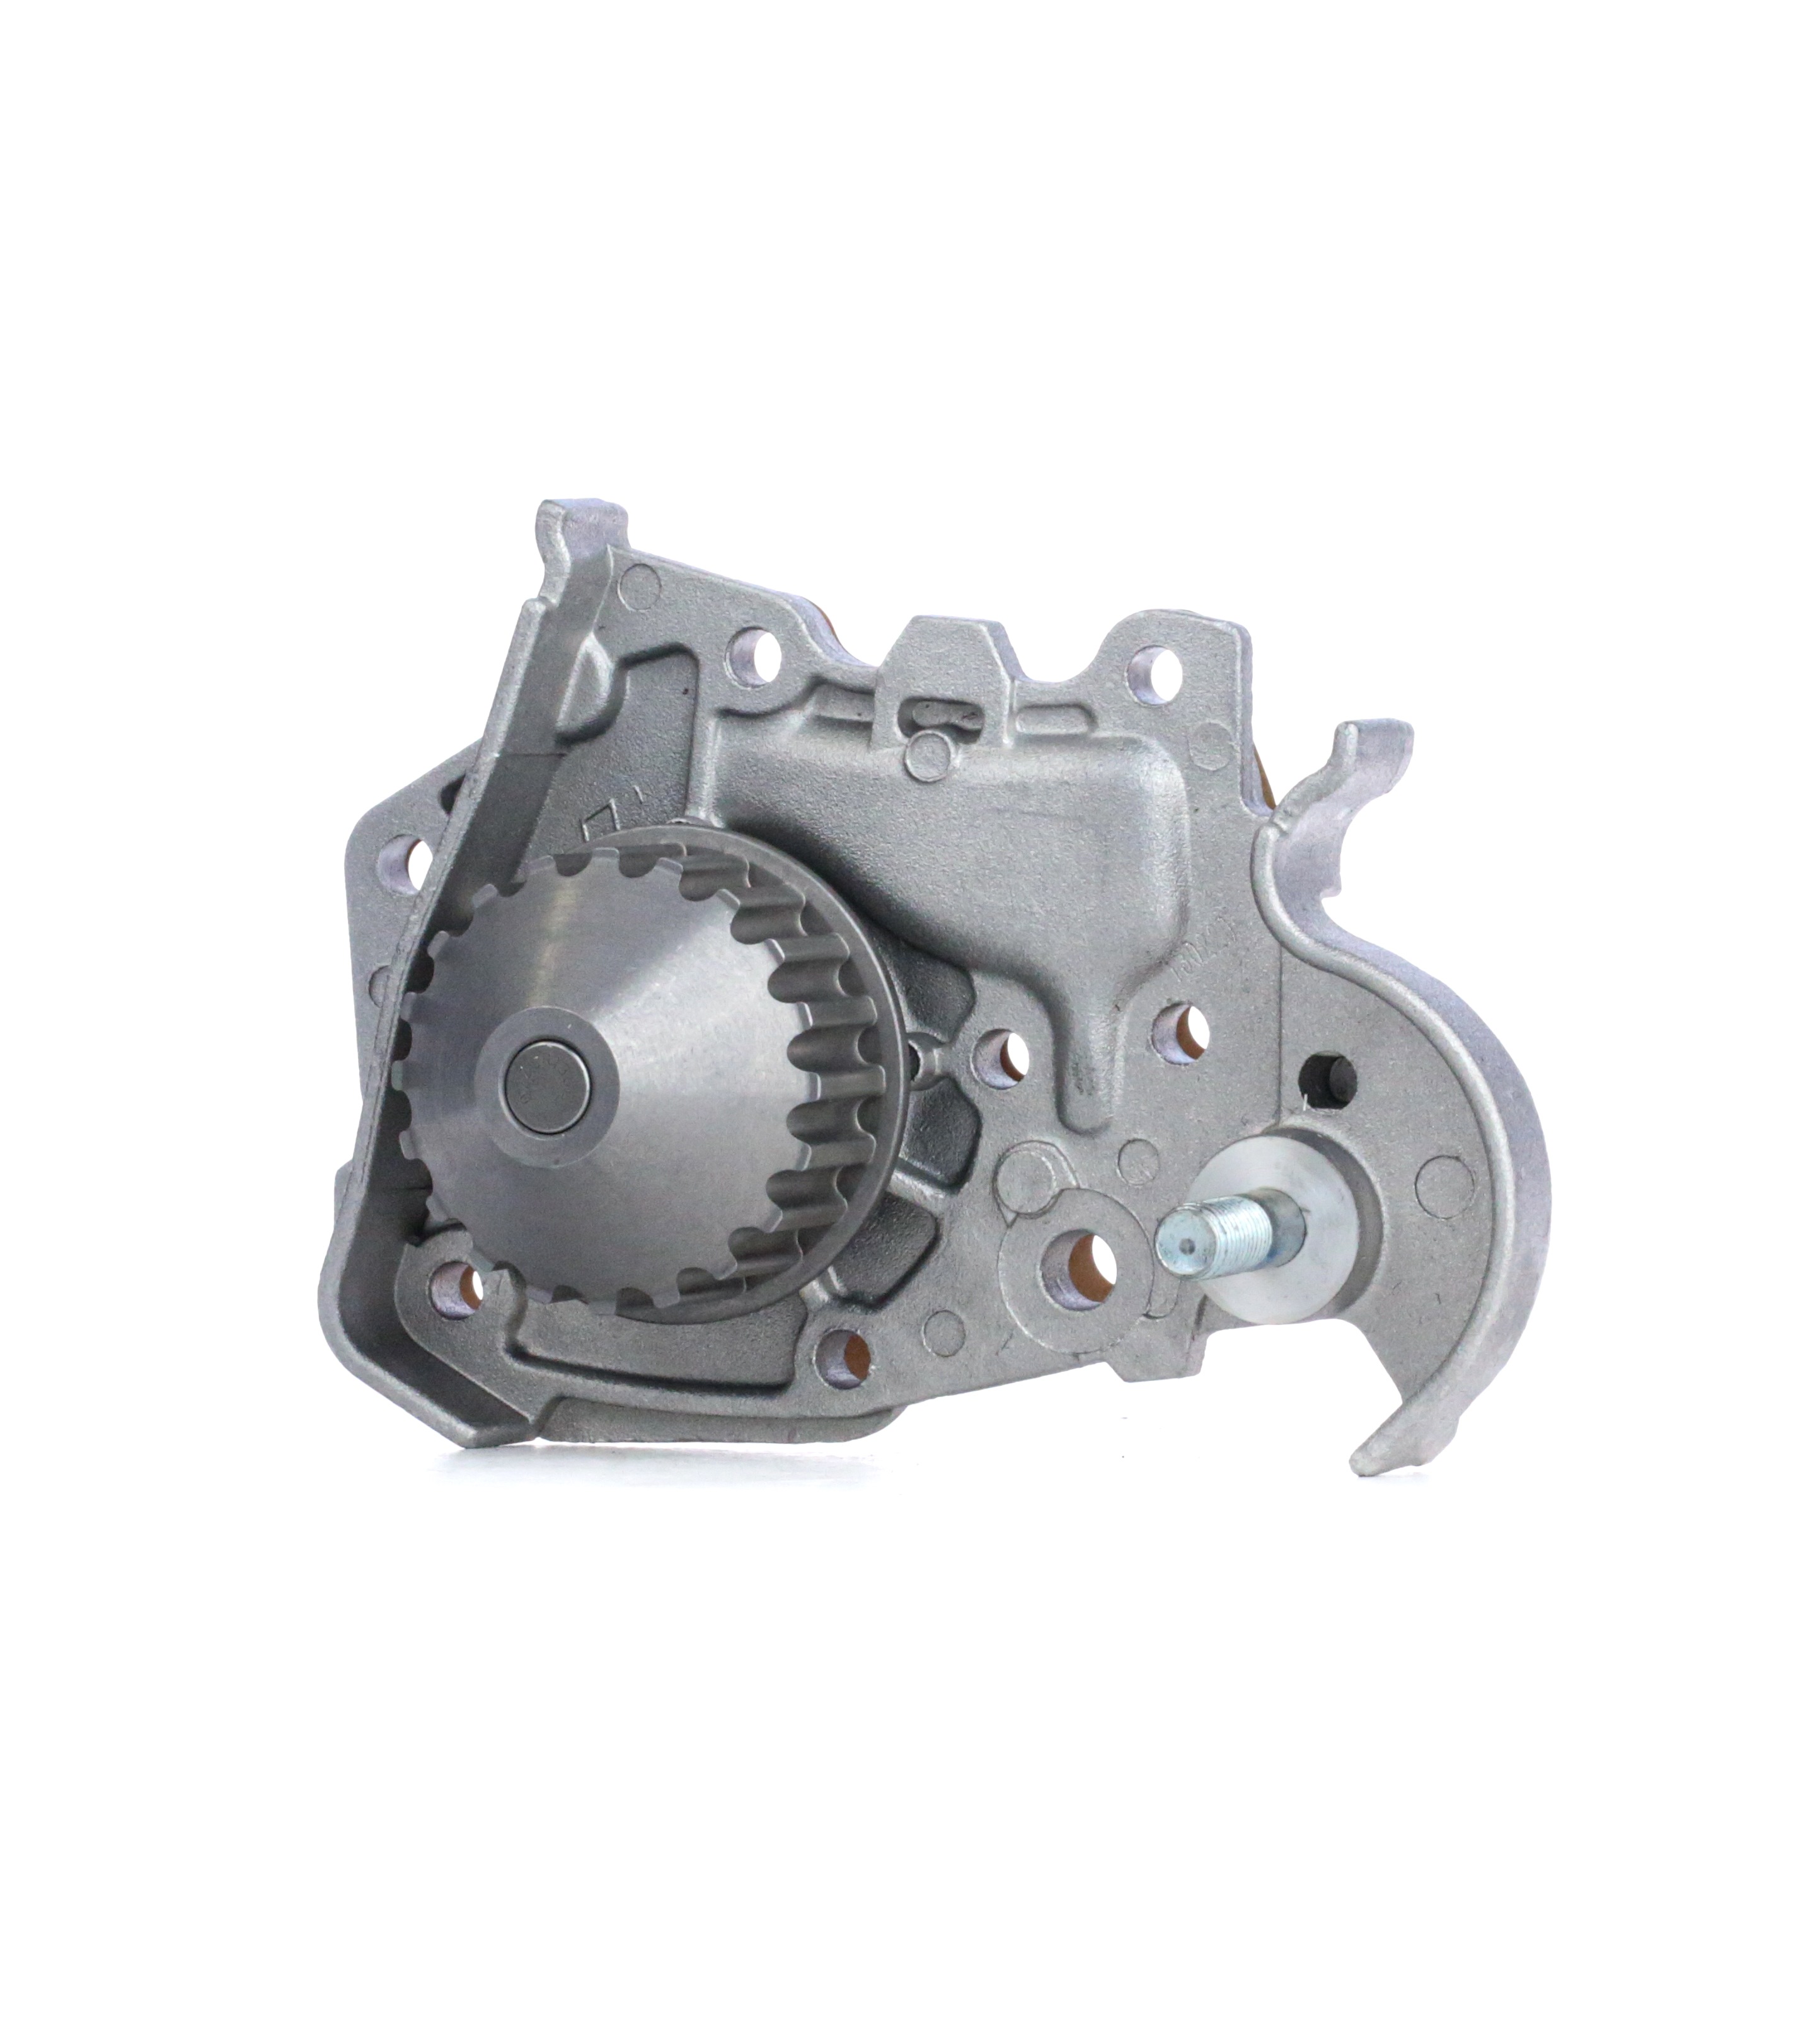 DOLZ R135 Water pump 7700.861.686